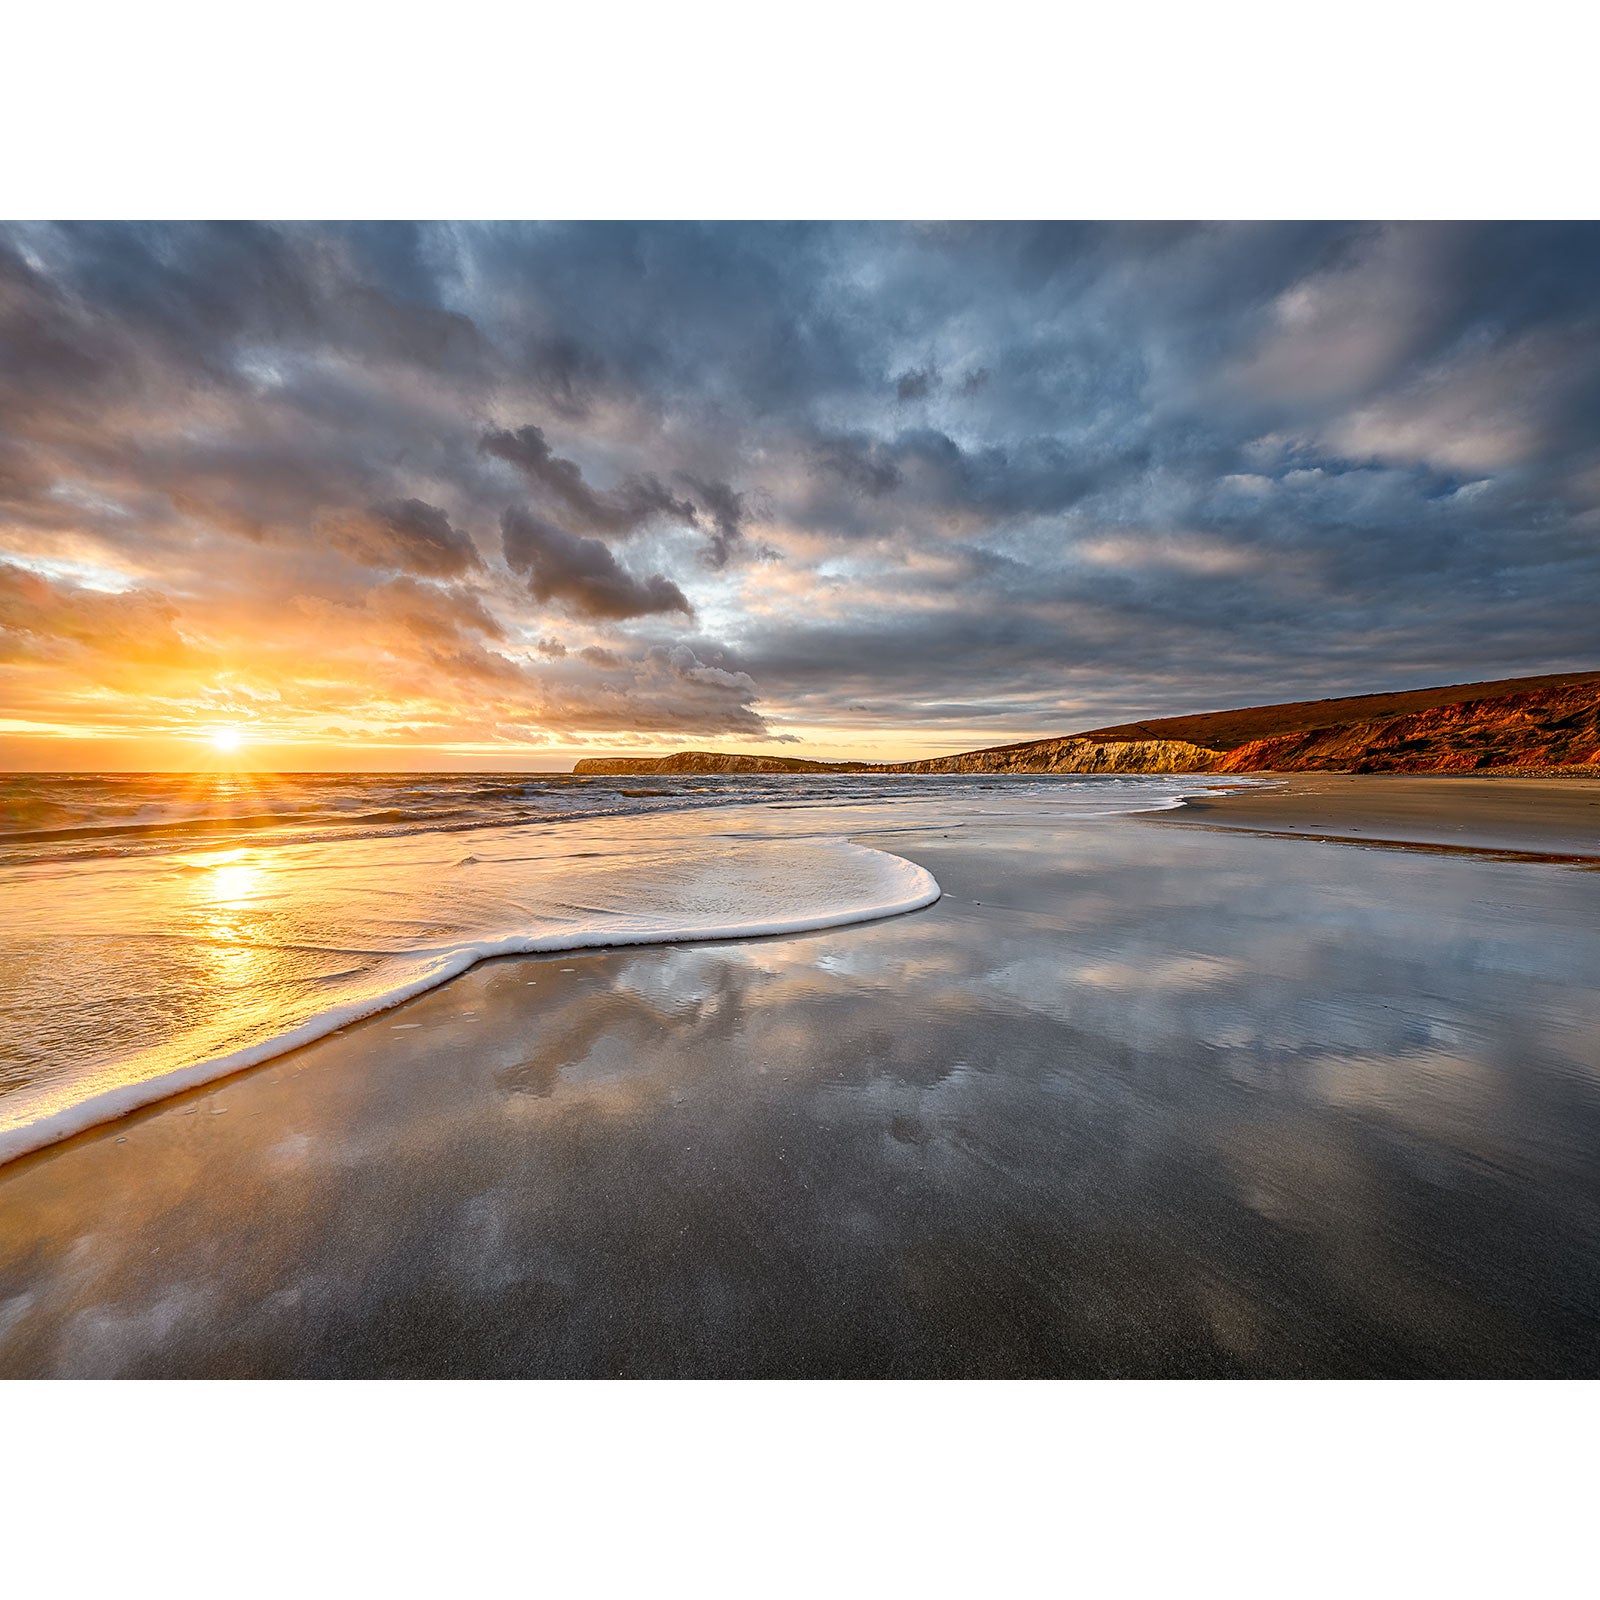 Compton Bay - Available Light Photography